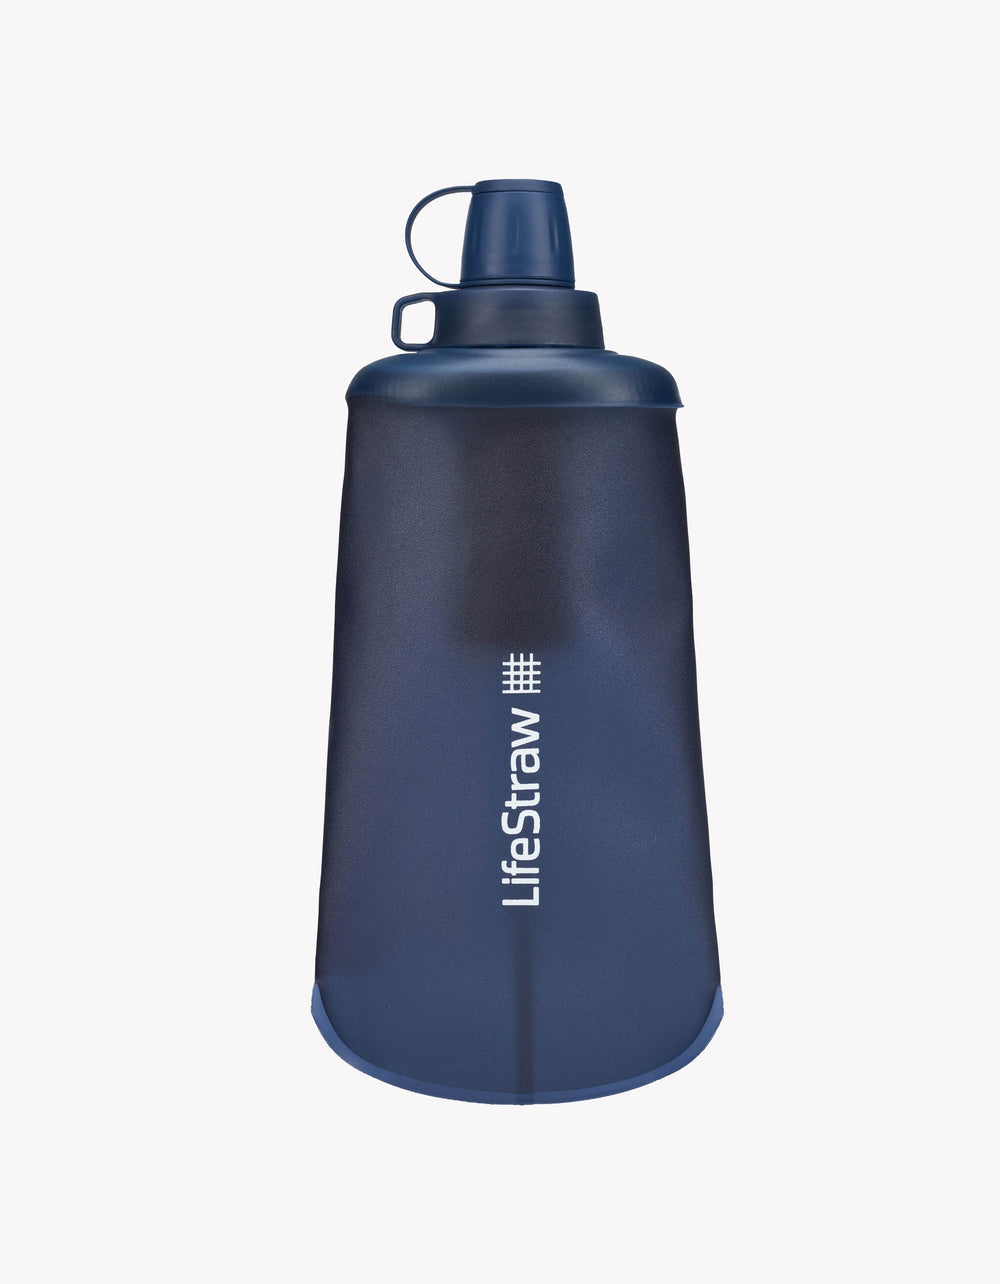 LifeStraw - 650ml Collapsible Squeeze Bottle - Mountain Blue-1